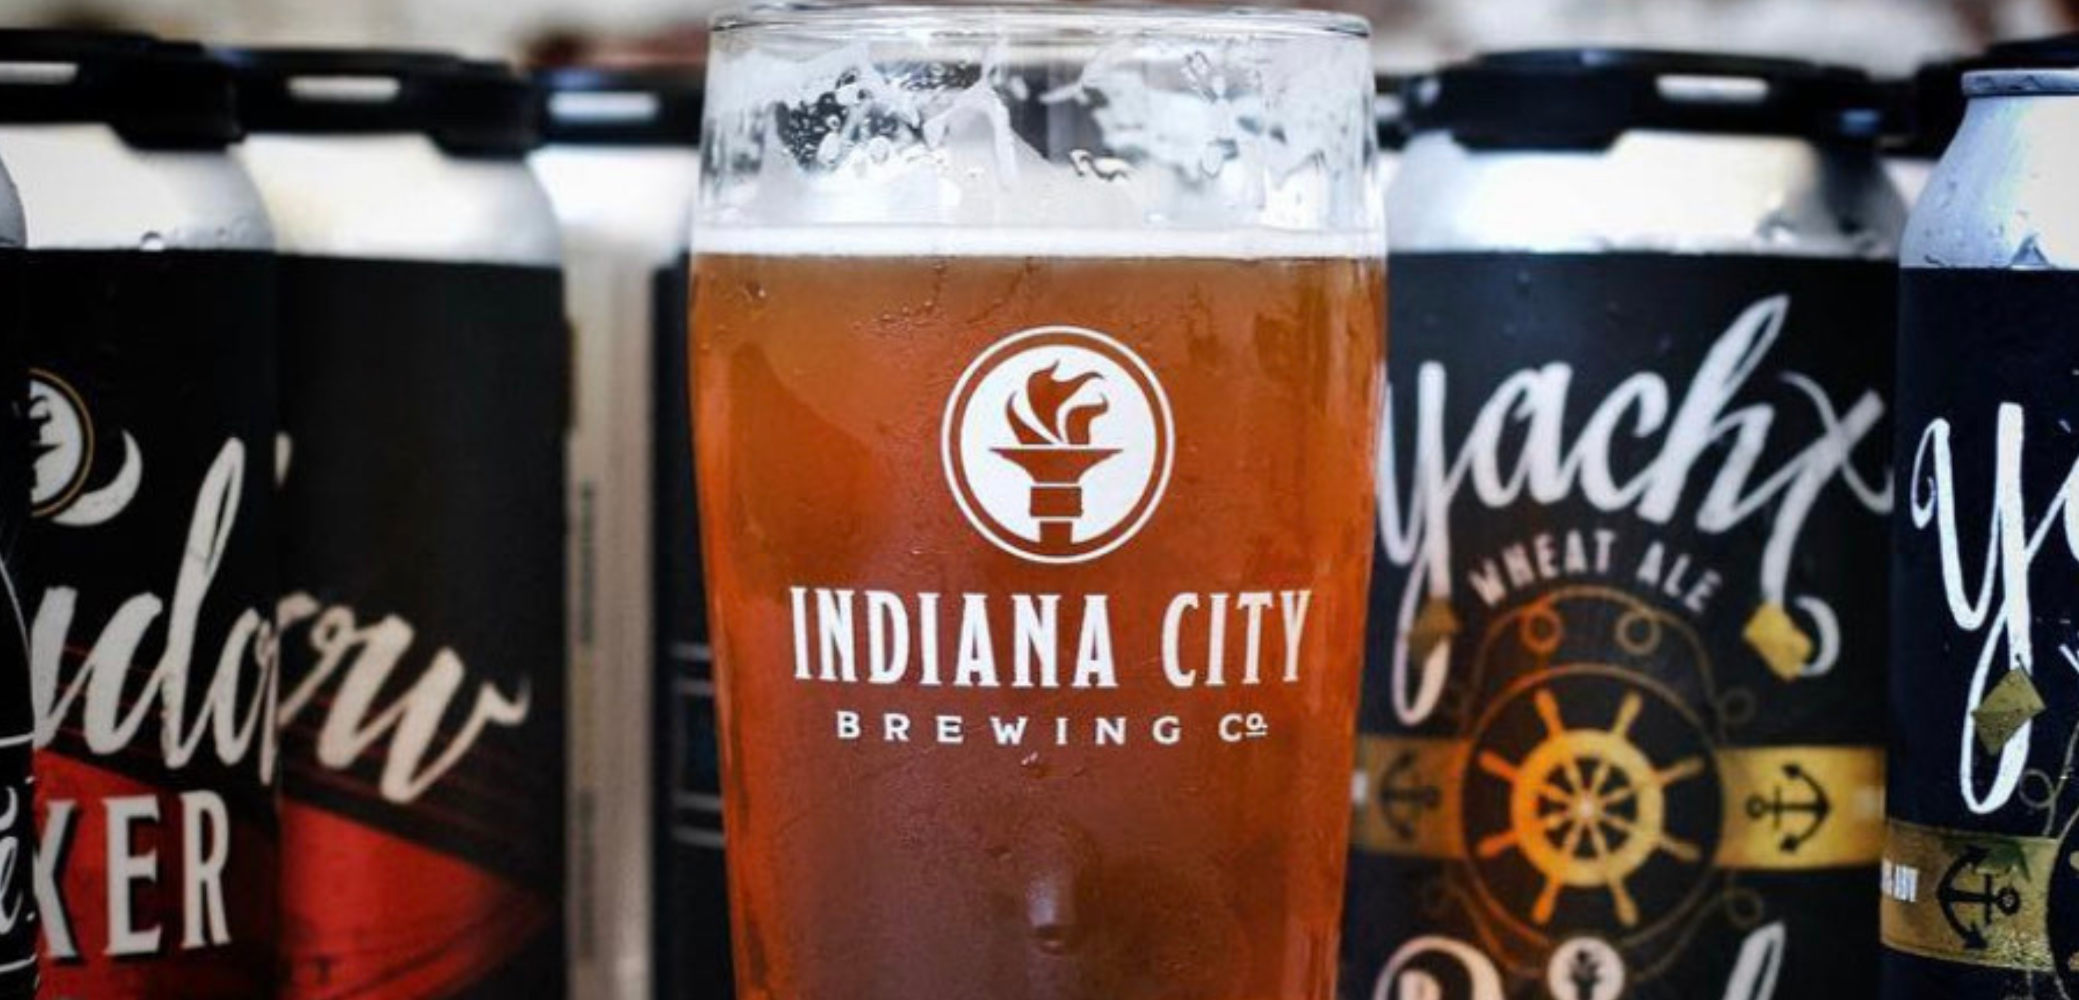 Indiana City Brewing: 10 BBL  Indianapolis Microbrewery: 15 BBL Mash Tun & 10 BBL Brew Kettle, 30, 20 & 7 BBL FVs & Brites, Can Line, Labeler